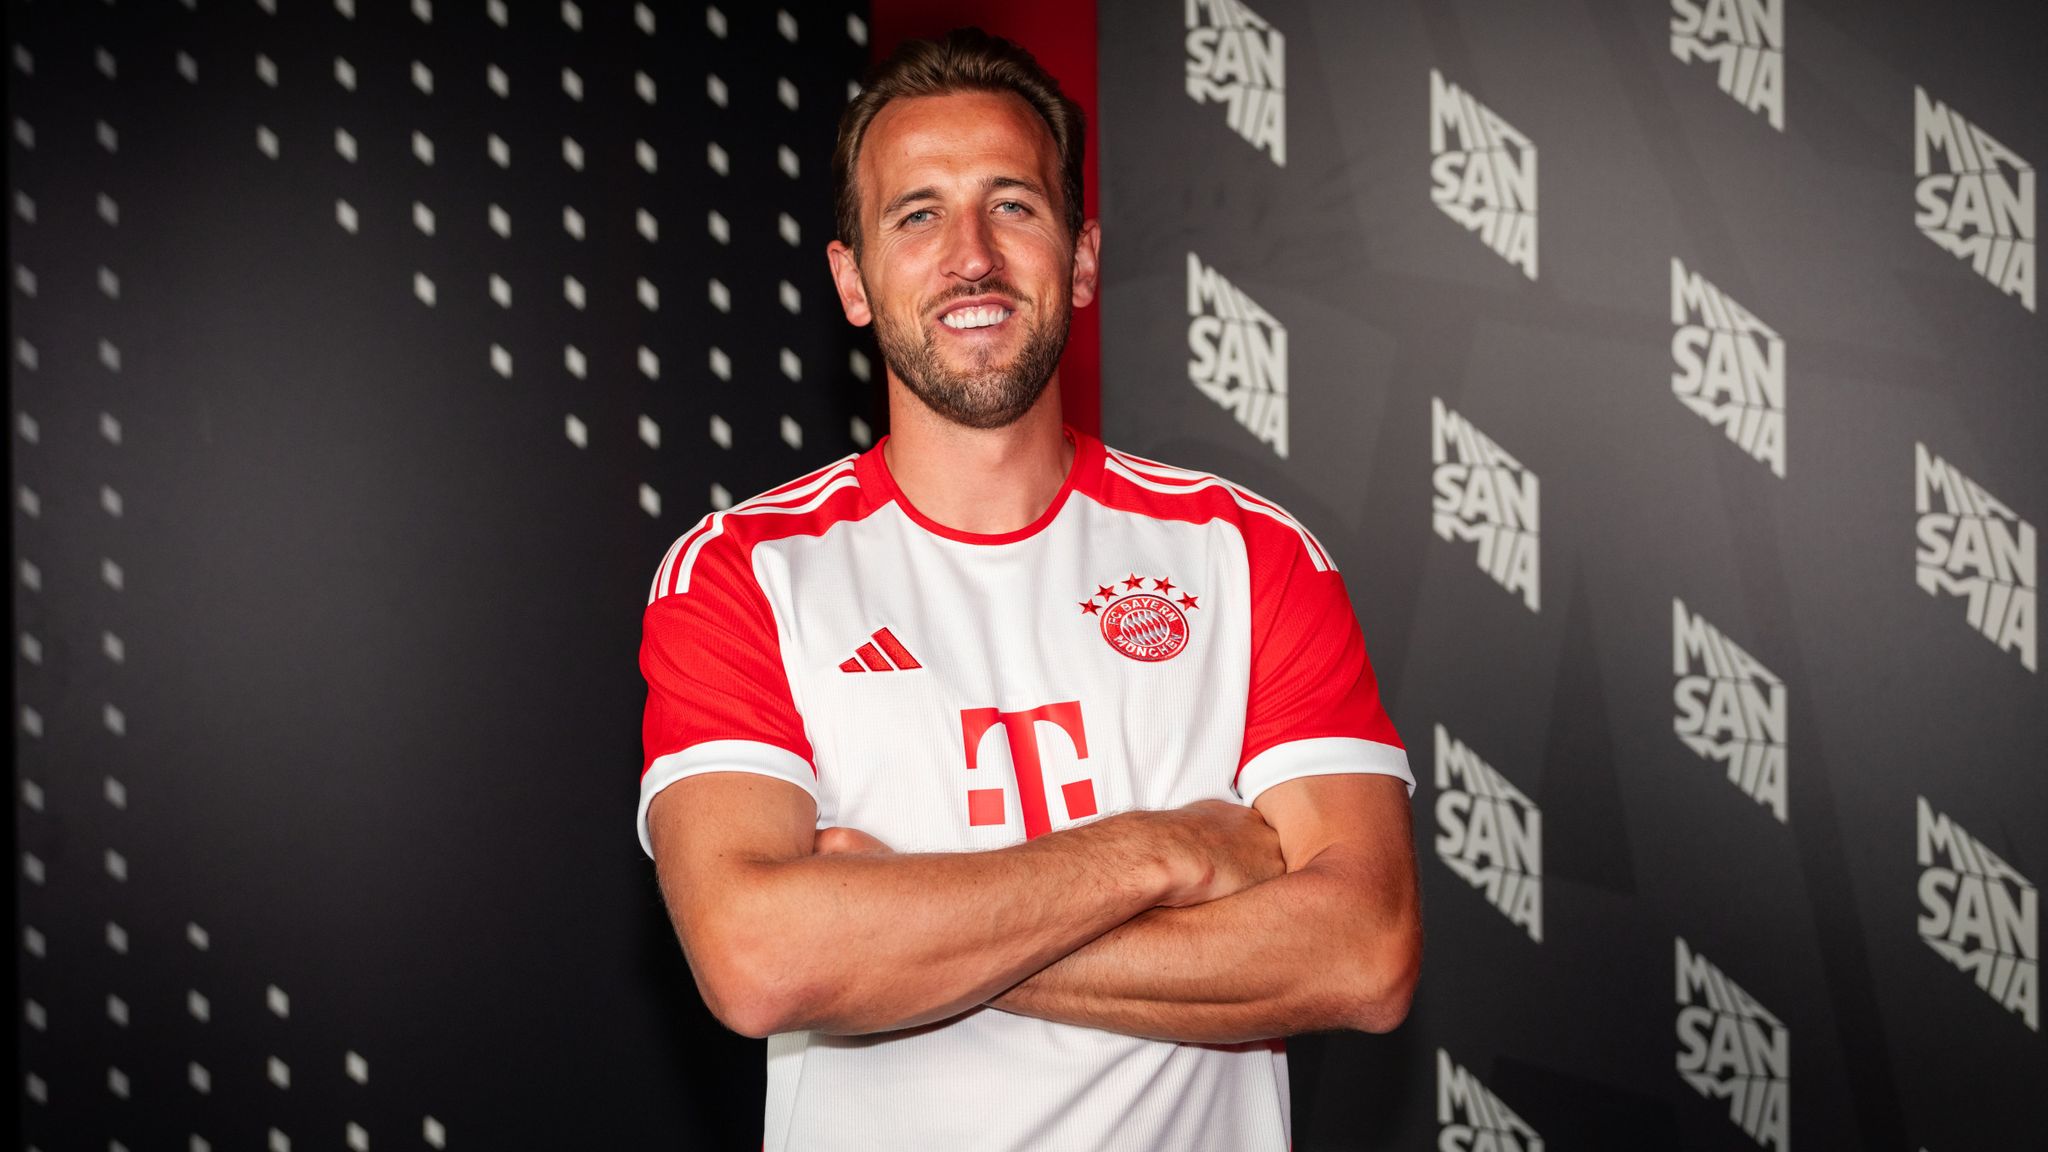 Download now: The official FC Bayern team photo